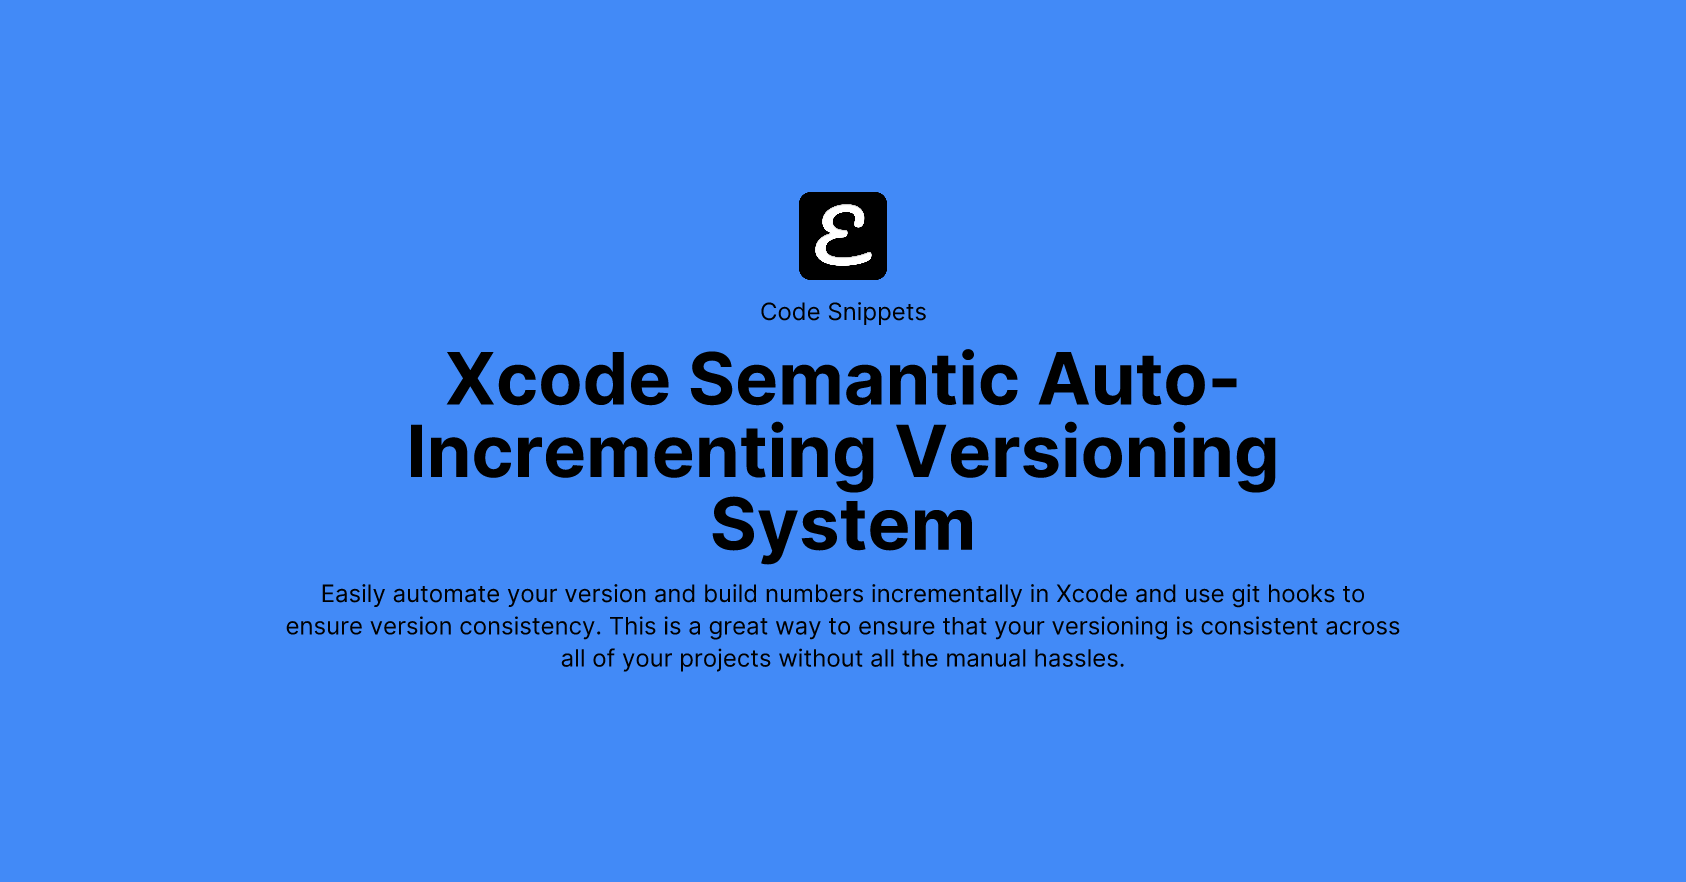 Xcode Semantic Auto-Incrementing Versioning System by Eric David Smith